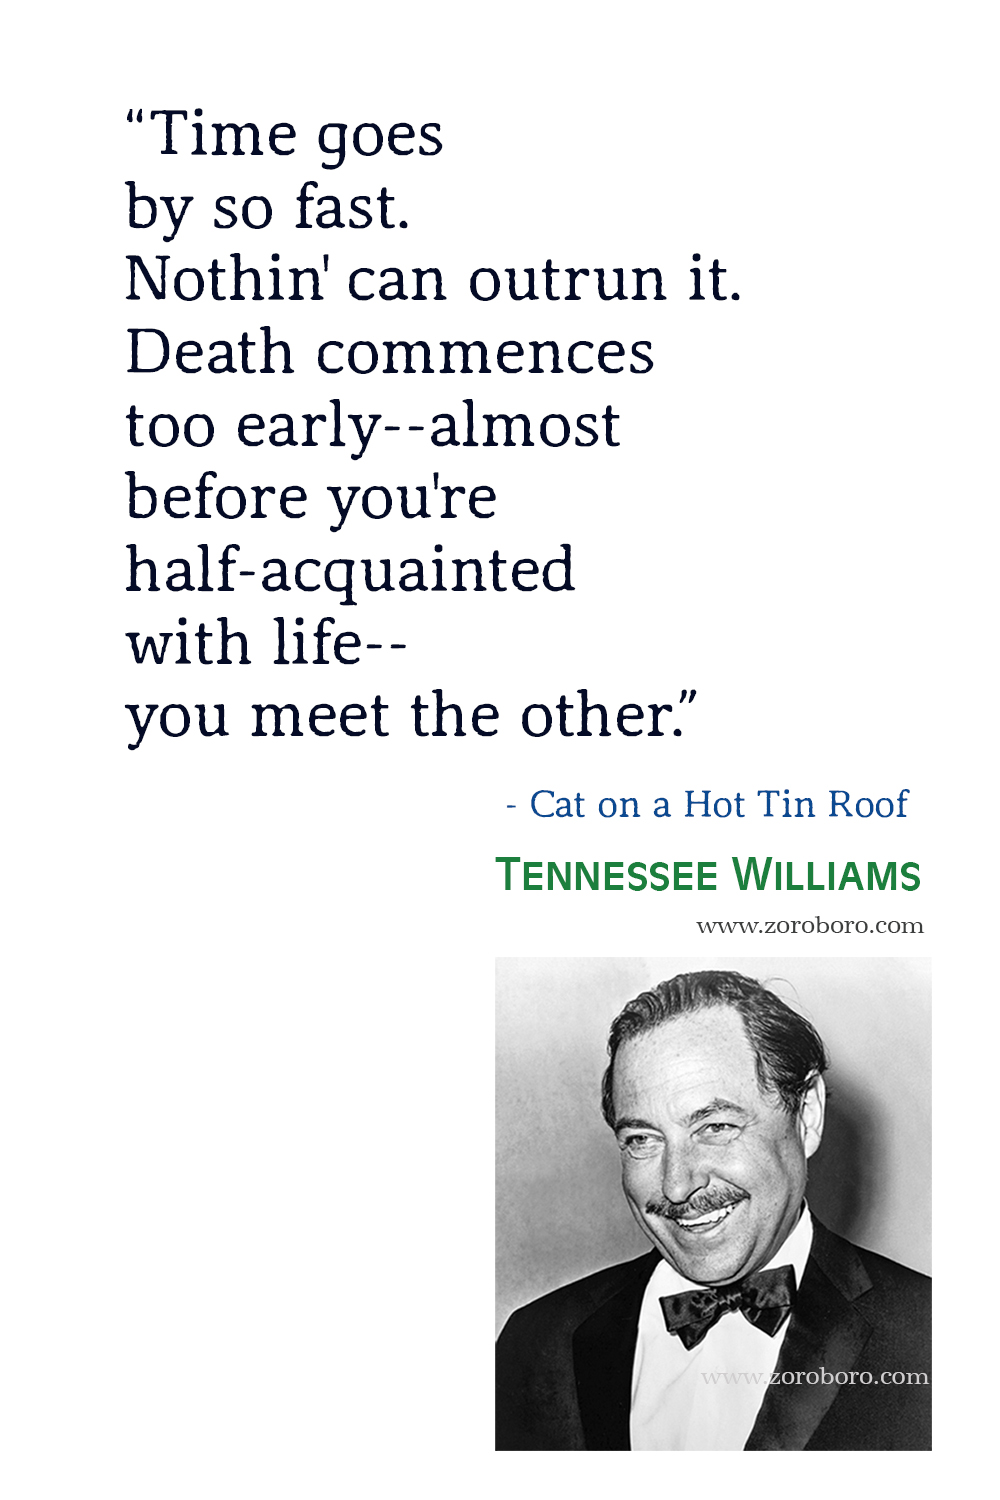 Tennessee Williams Quotes, Tennessee Williams Books Quotes, Tennessee Williams A Streetcar Named Desire, Love, Life, Happiness & Success Quotes, Tennessee Williams Poems, Poetry, Tennessee Williams The Glass Menagerie Quotes, Tennessee Williams Cat on a Hot Tin Roof Quotes.